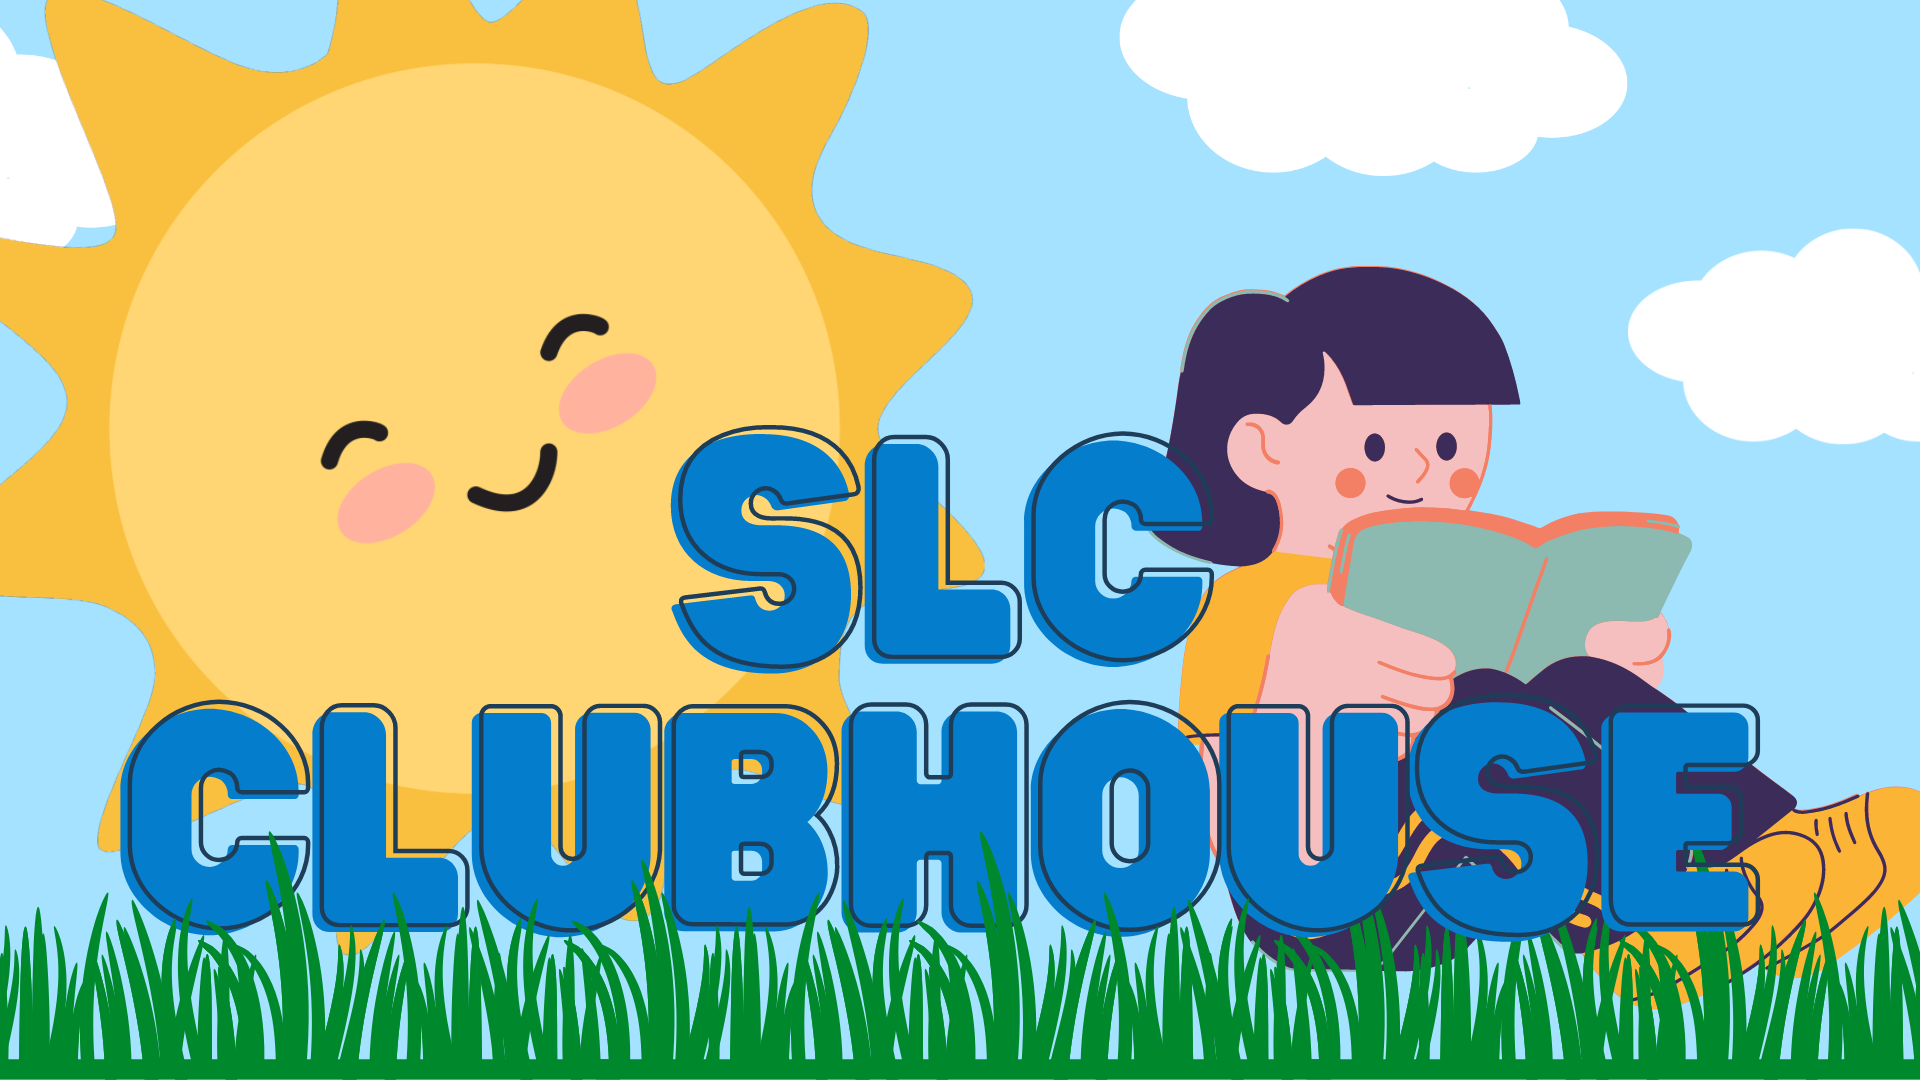 SLC Clubhouse. kid reading outside in grass with sun